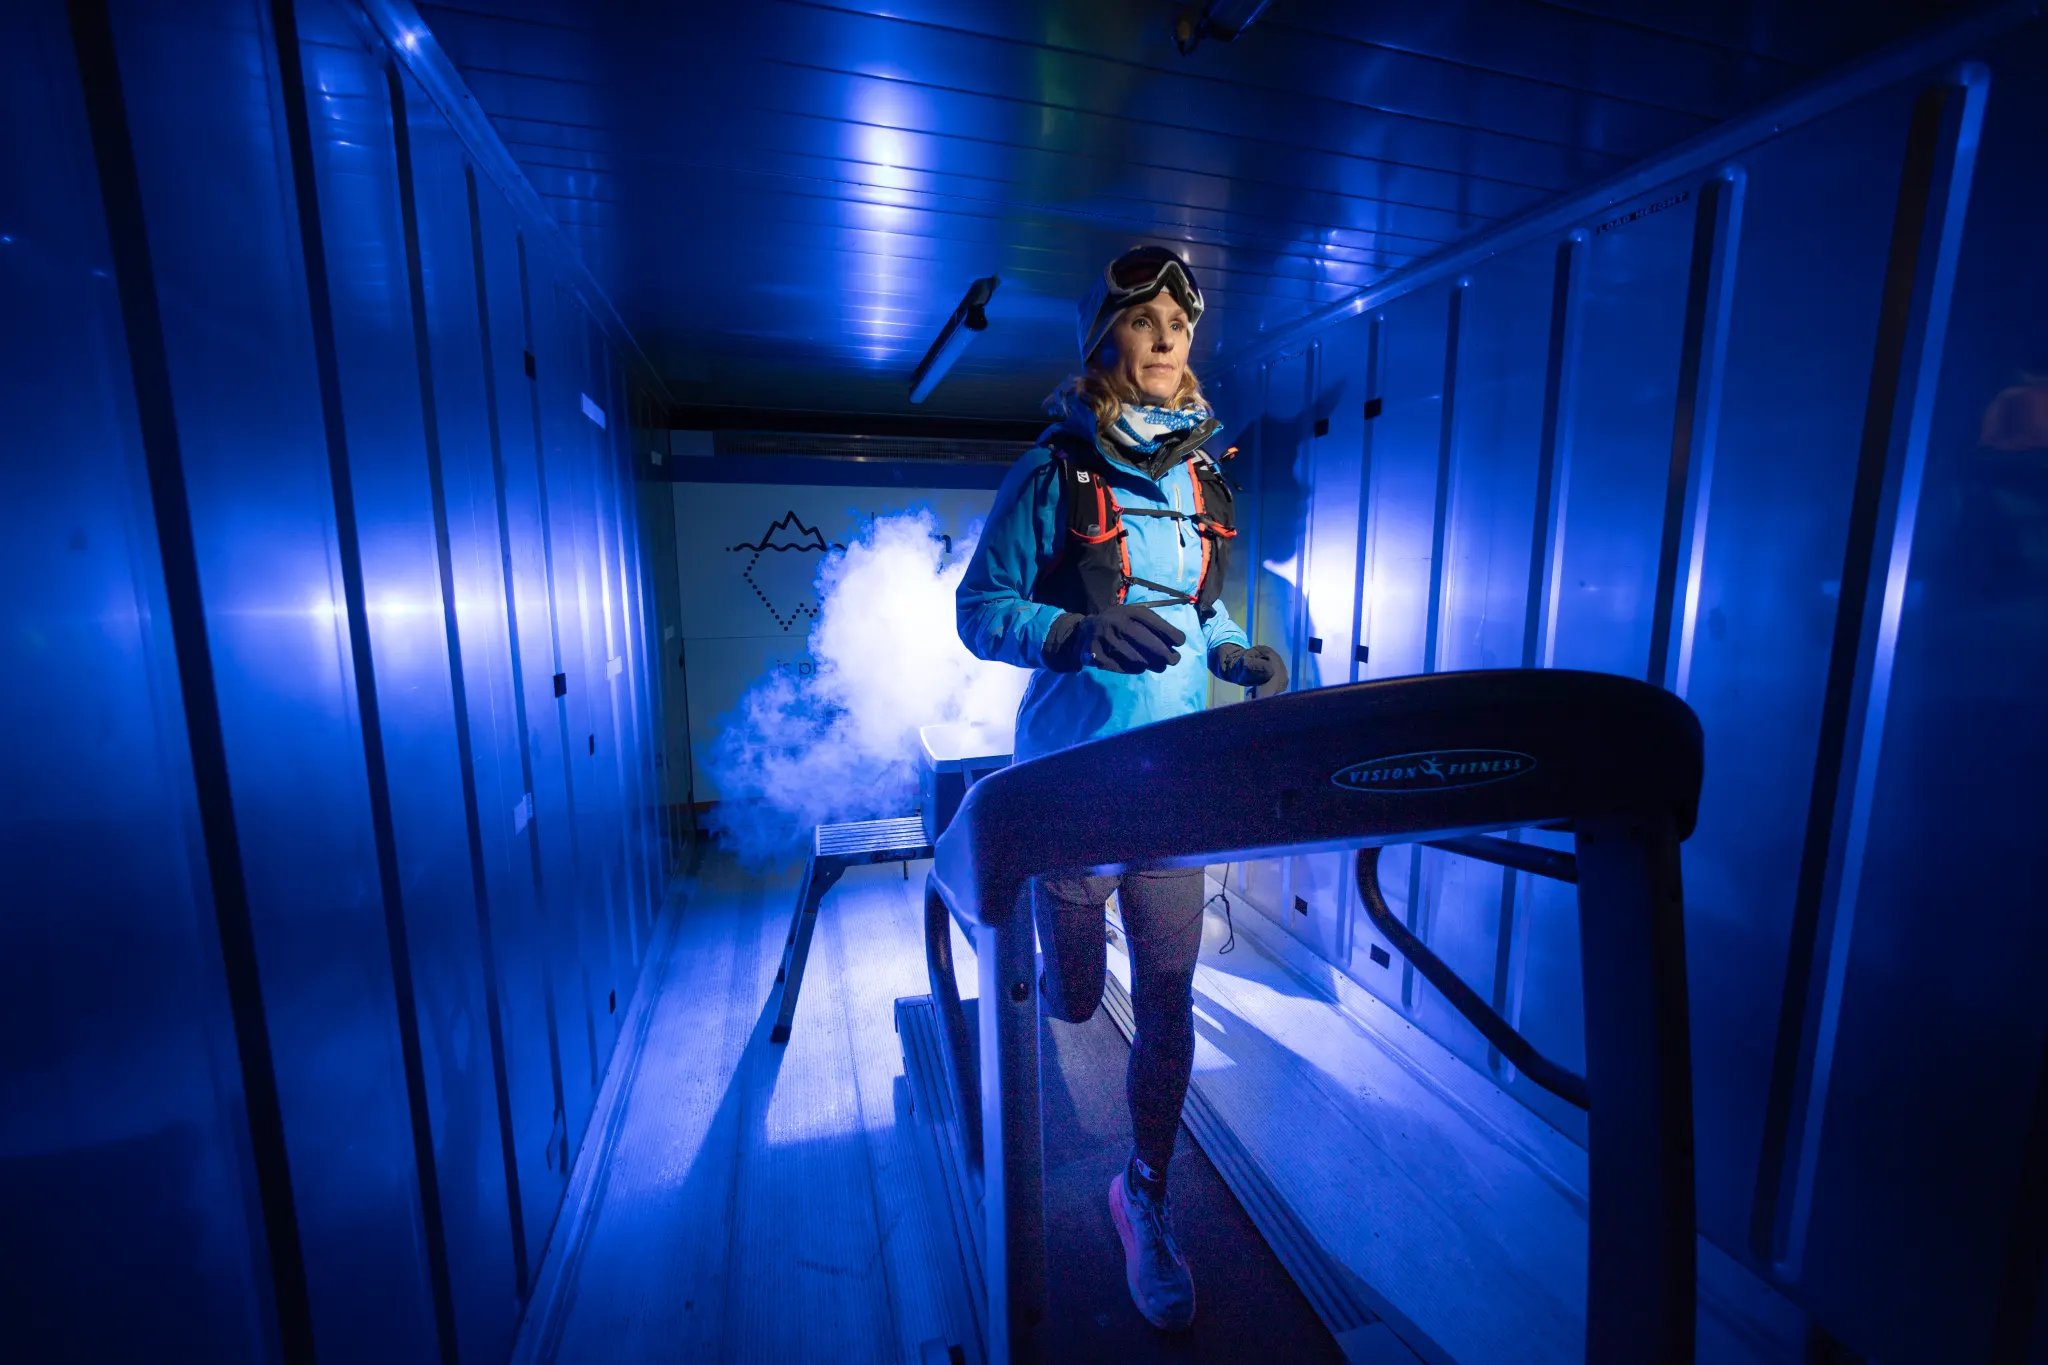 Pain scientist Donna Urquhart on the treadmill in a freezer container as she prepares for her world record attempt in Antarctica. CREDIT: JASON SOUTH (www.theage.com.au)